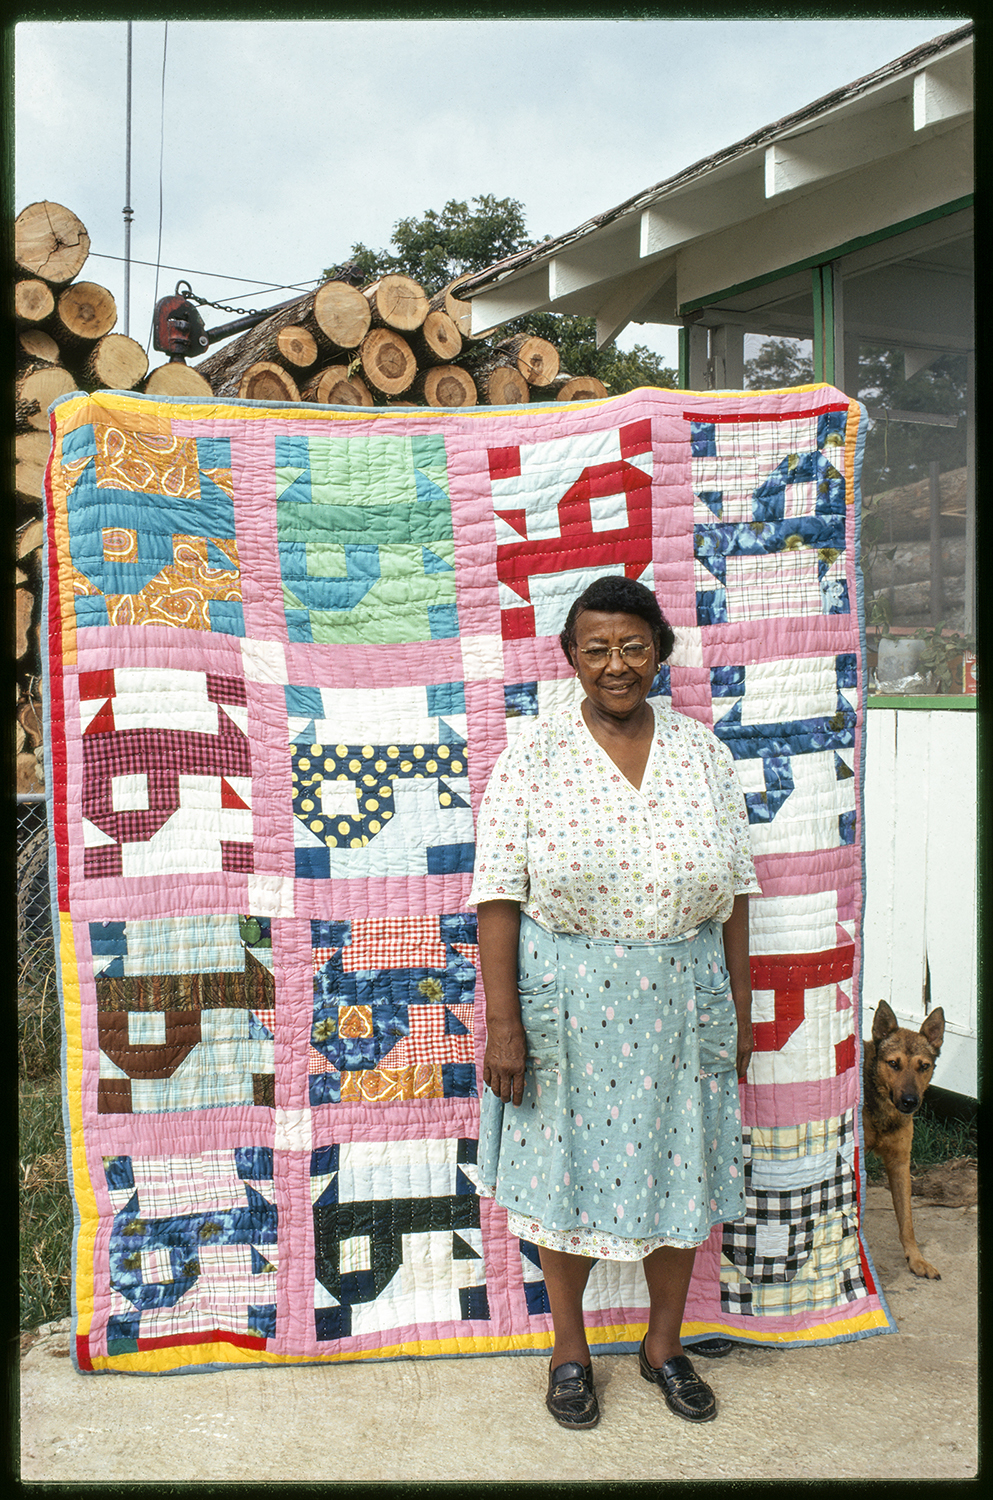   Pecolia Warner with her "P" quilt, Yazoo City, Mississippi , 1975 13 × 20 in. (image size) The Do Good Fund, Inc., 2016-131   